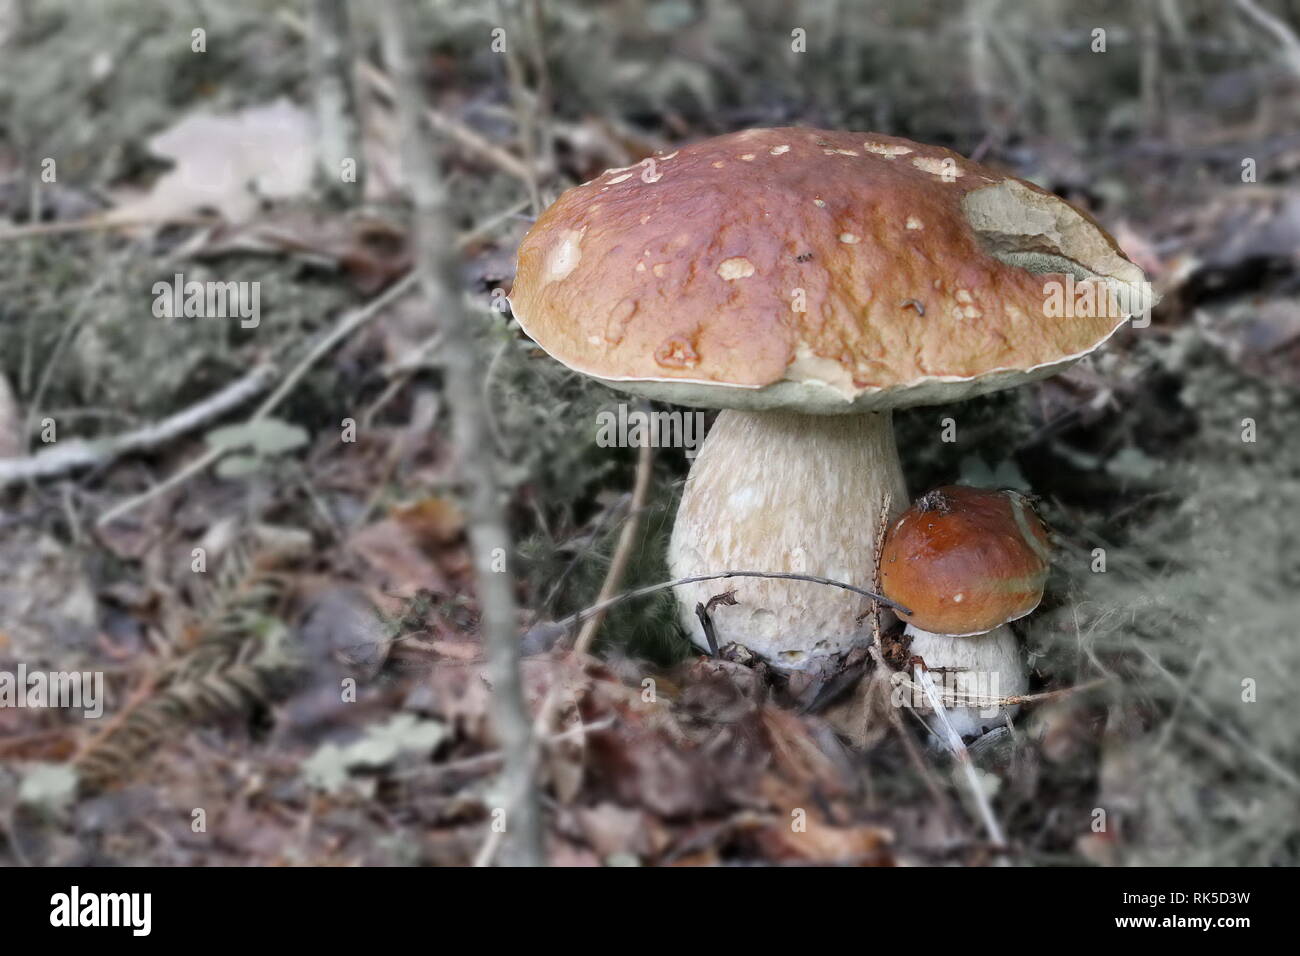 Oak Mushrooms in the moss, in the forest Stock Photo